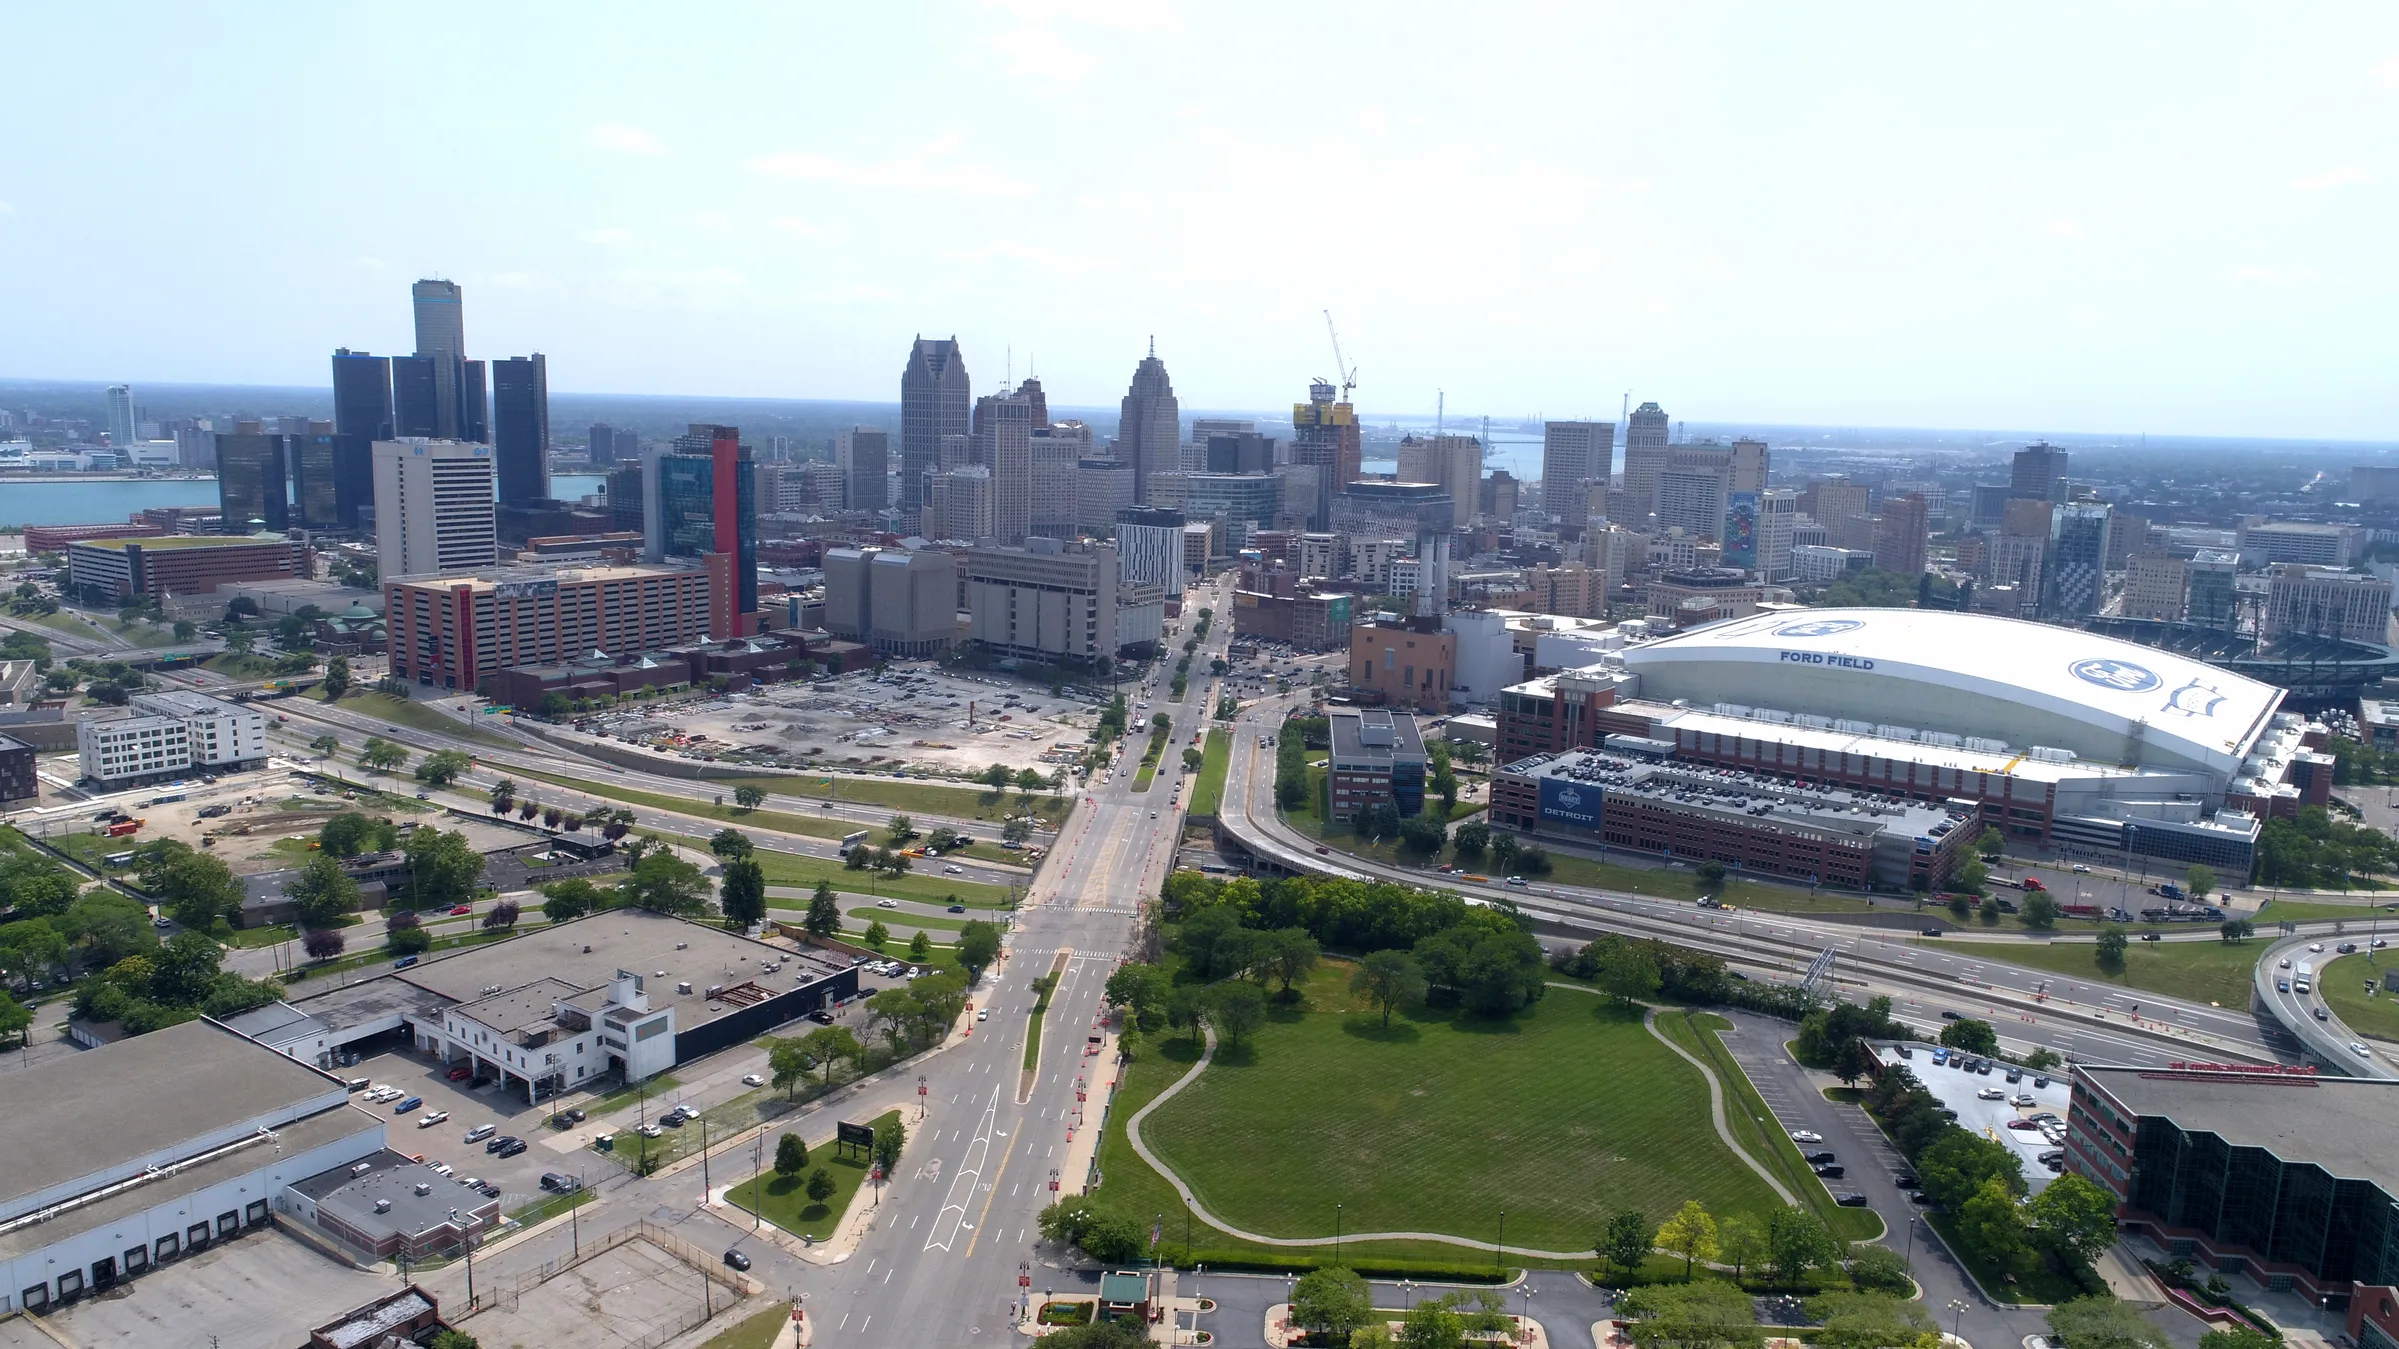 Detroit's Comeback: City Sees First Population Increase in Over 60 Years